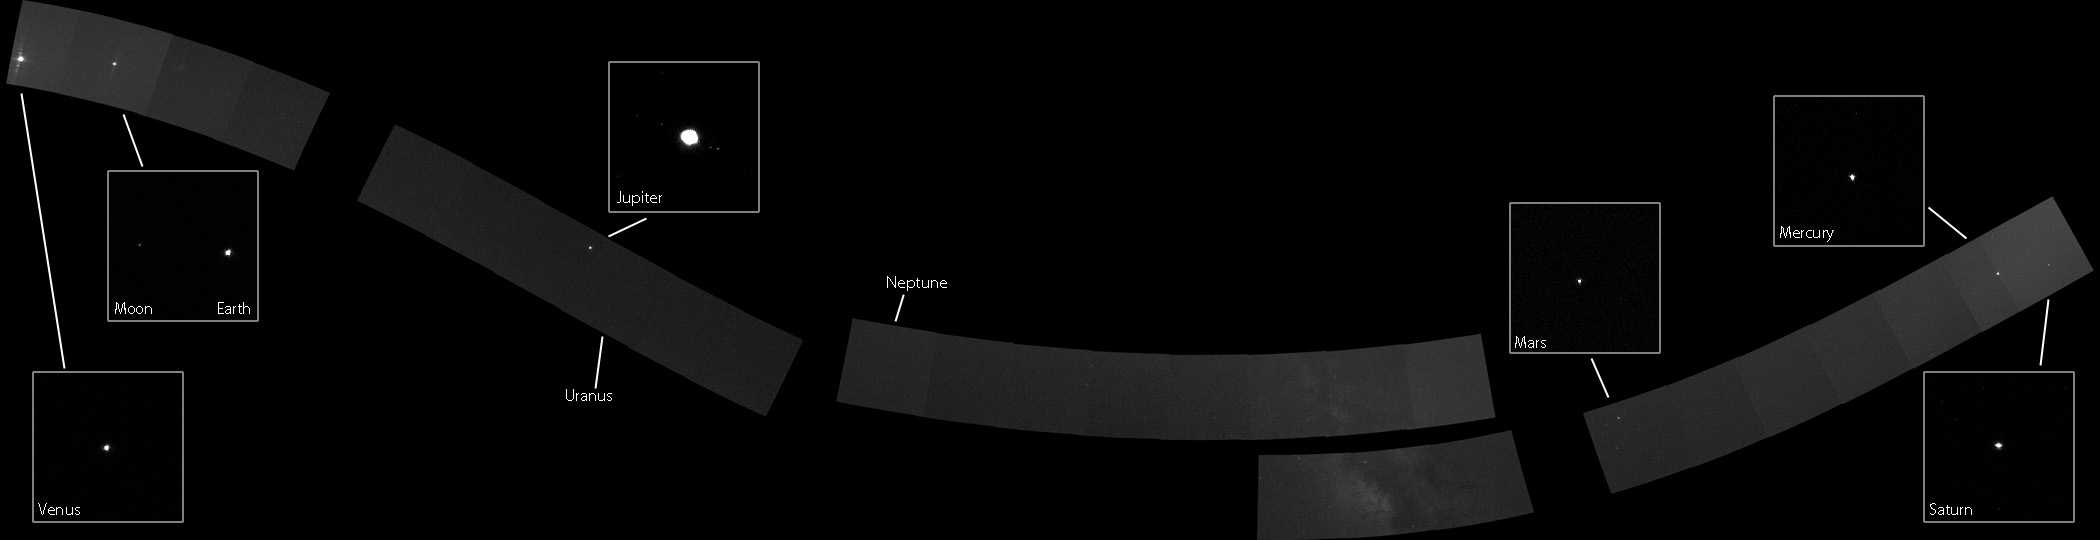 The MESSENGER spacecraft has captured the first portrait of our Solar System from the inside looking out.